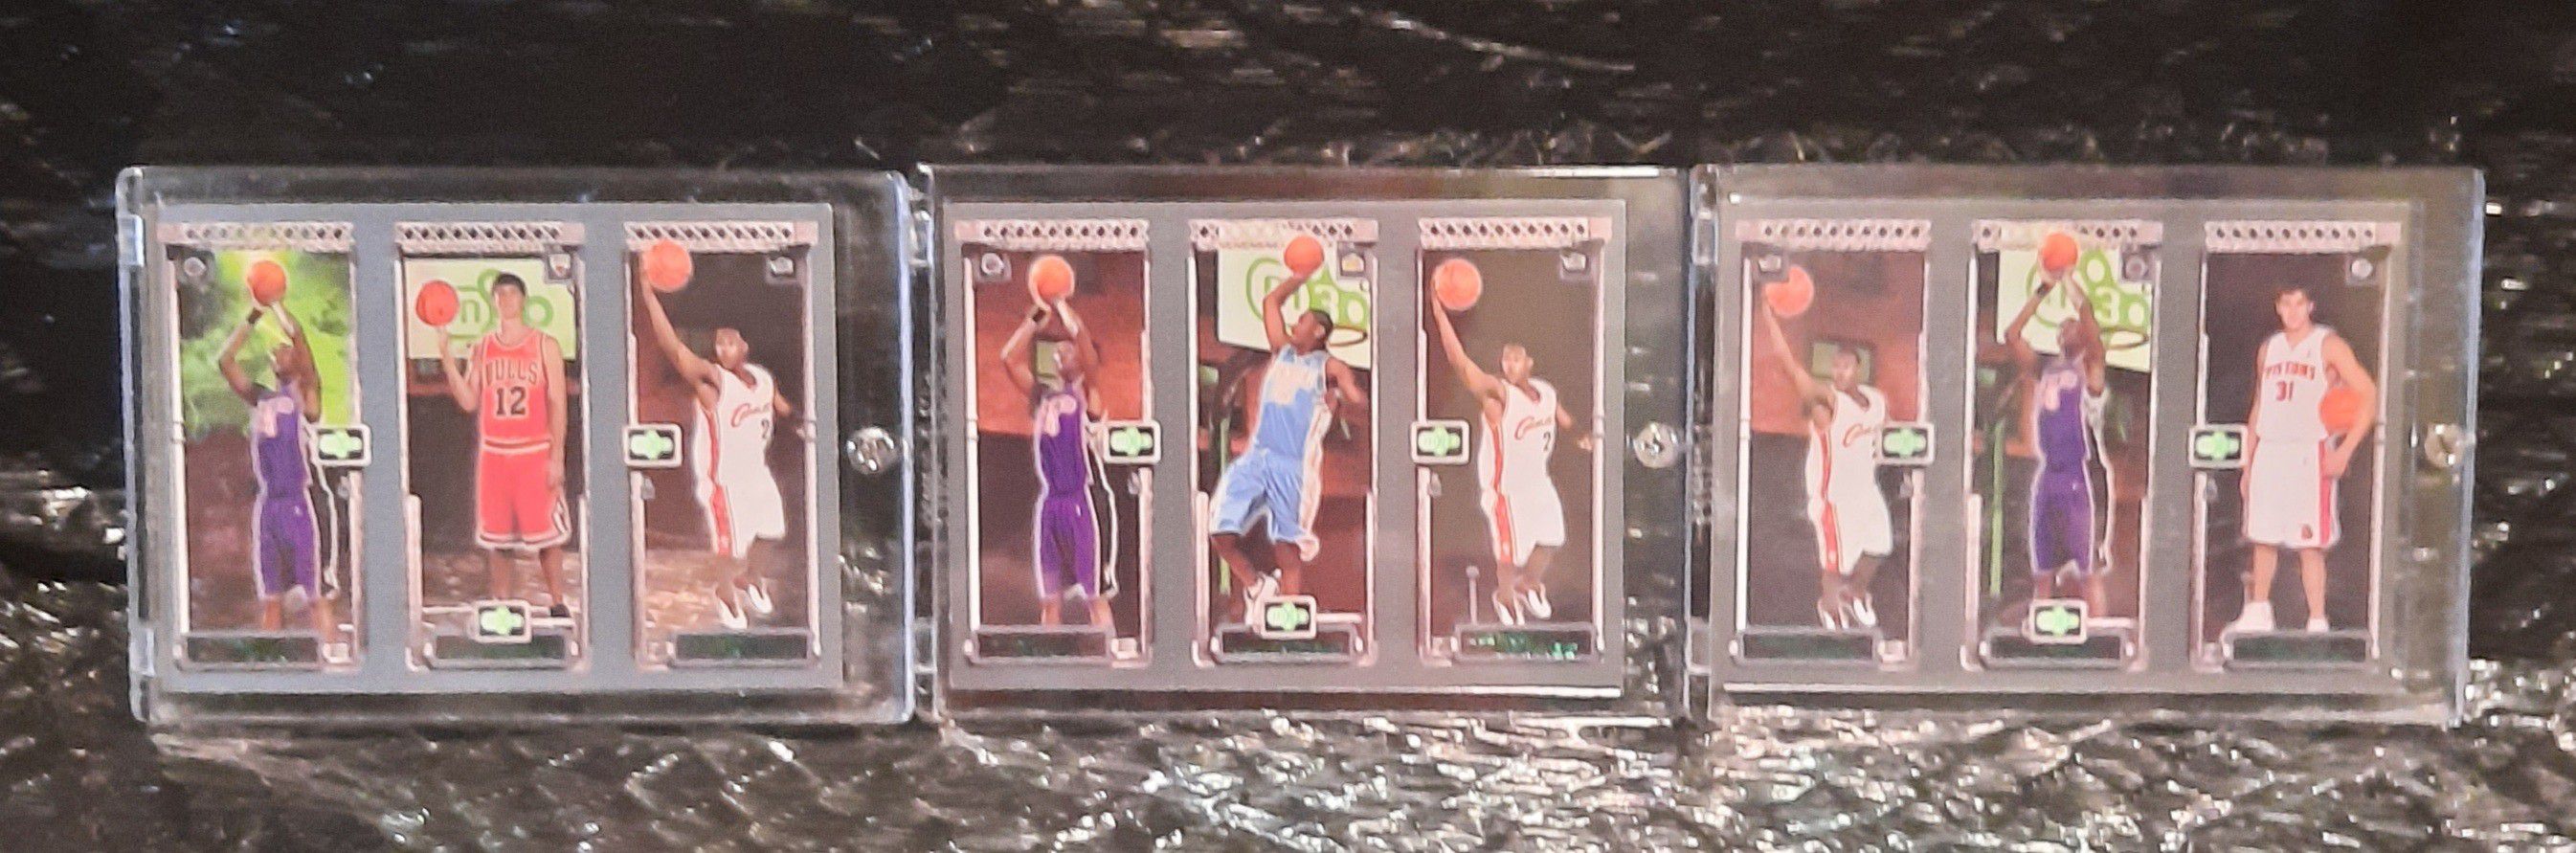 3 different LeBron James 2003-04 Topps Matrix Rookie Cards w/ Chris Bosh & Carmelo Anthony - Feel free to make an offer!